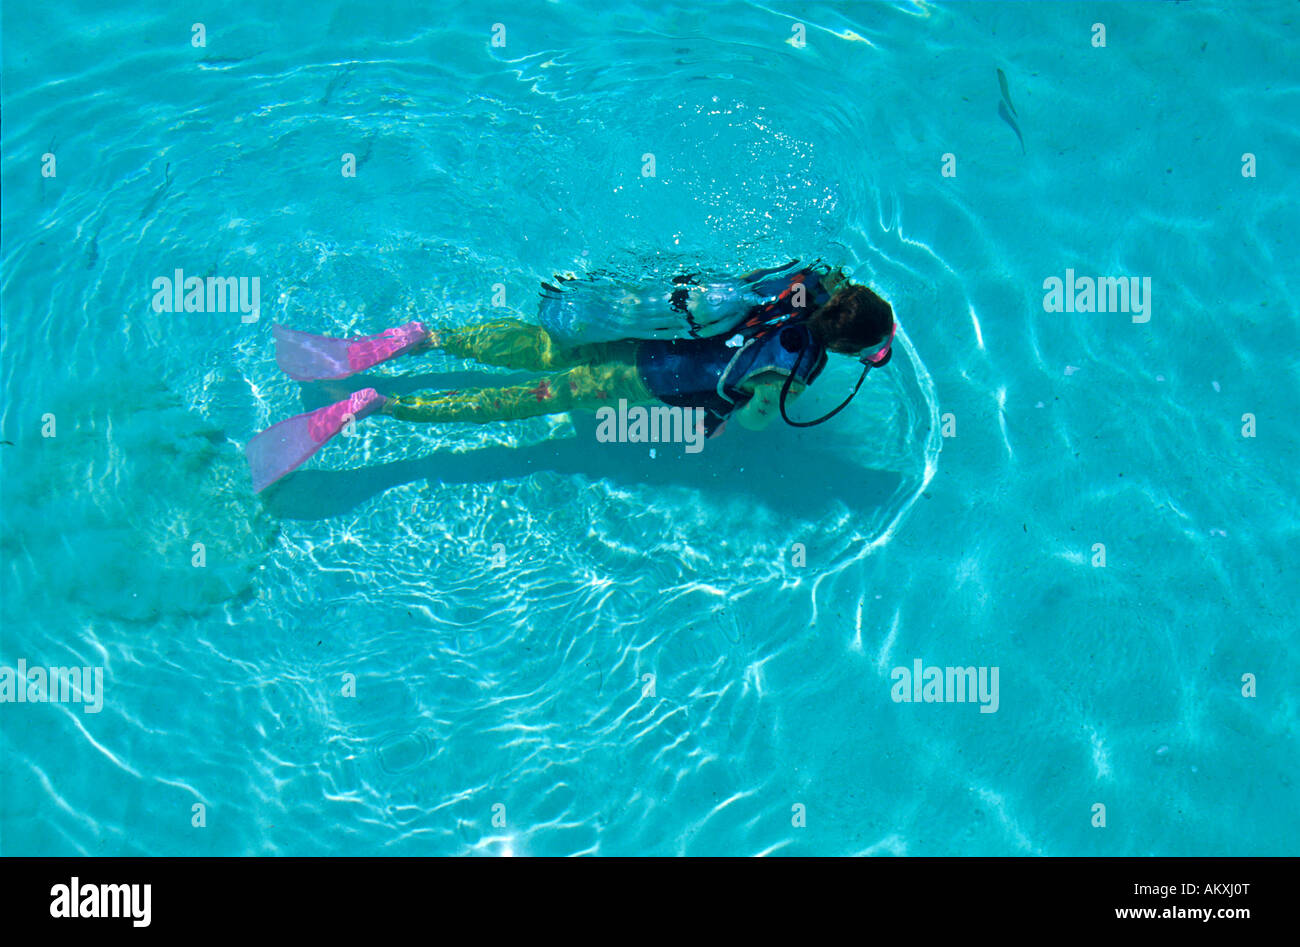 A Diver in shallow water, Maldives. Stock Photo